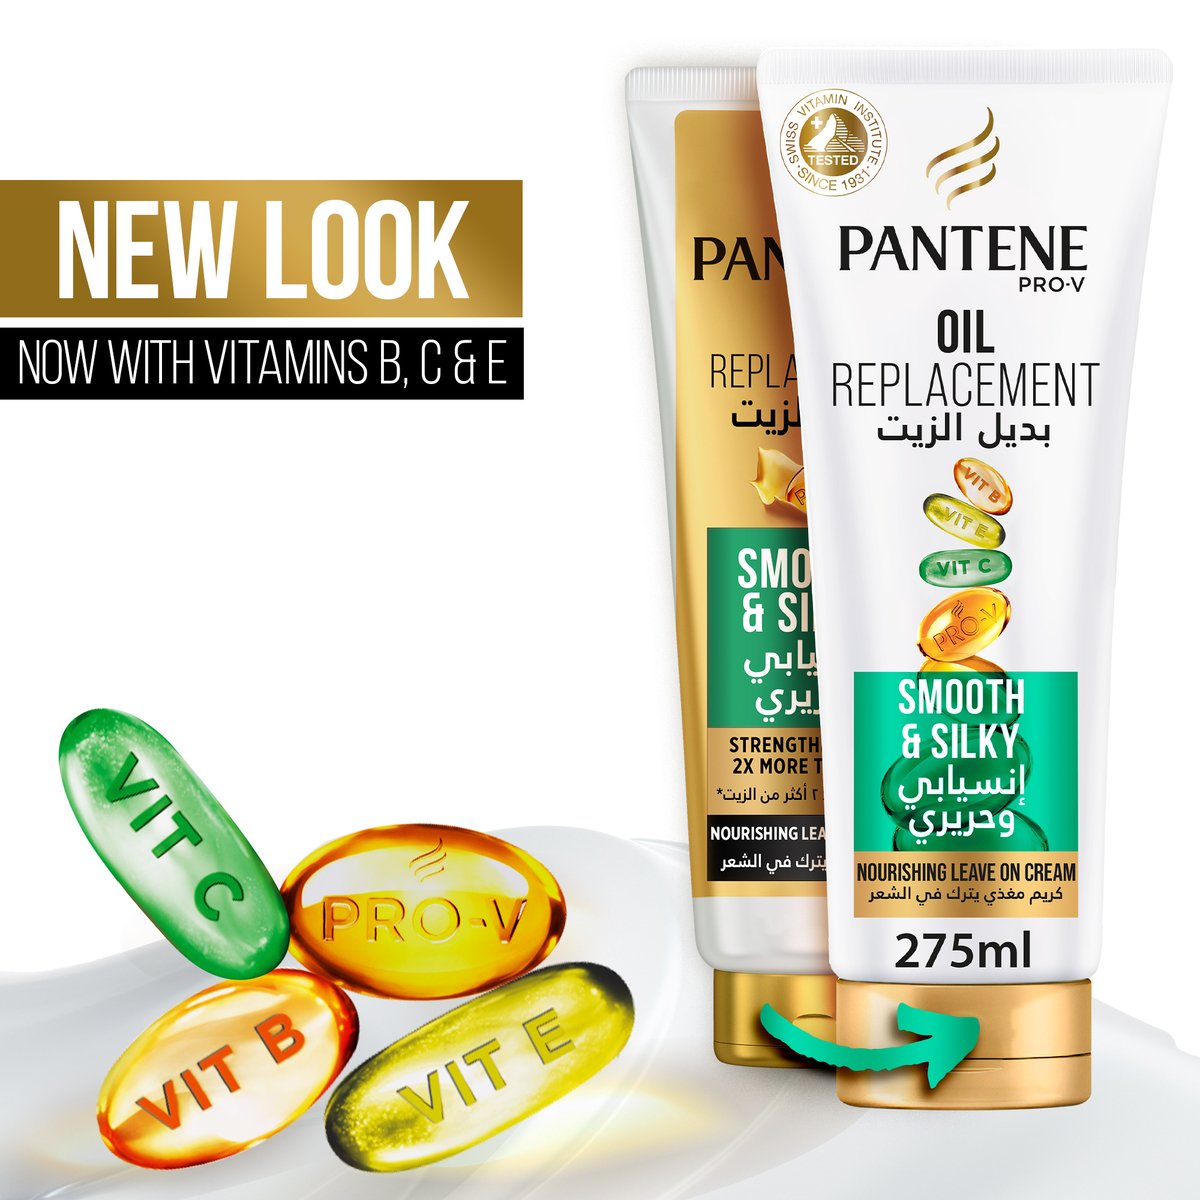 Pantene Pro-V Hair Oil Replacement Smooth & Silky Leave On Cream Value Pack 275 ml